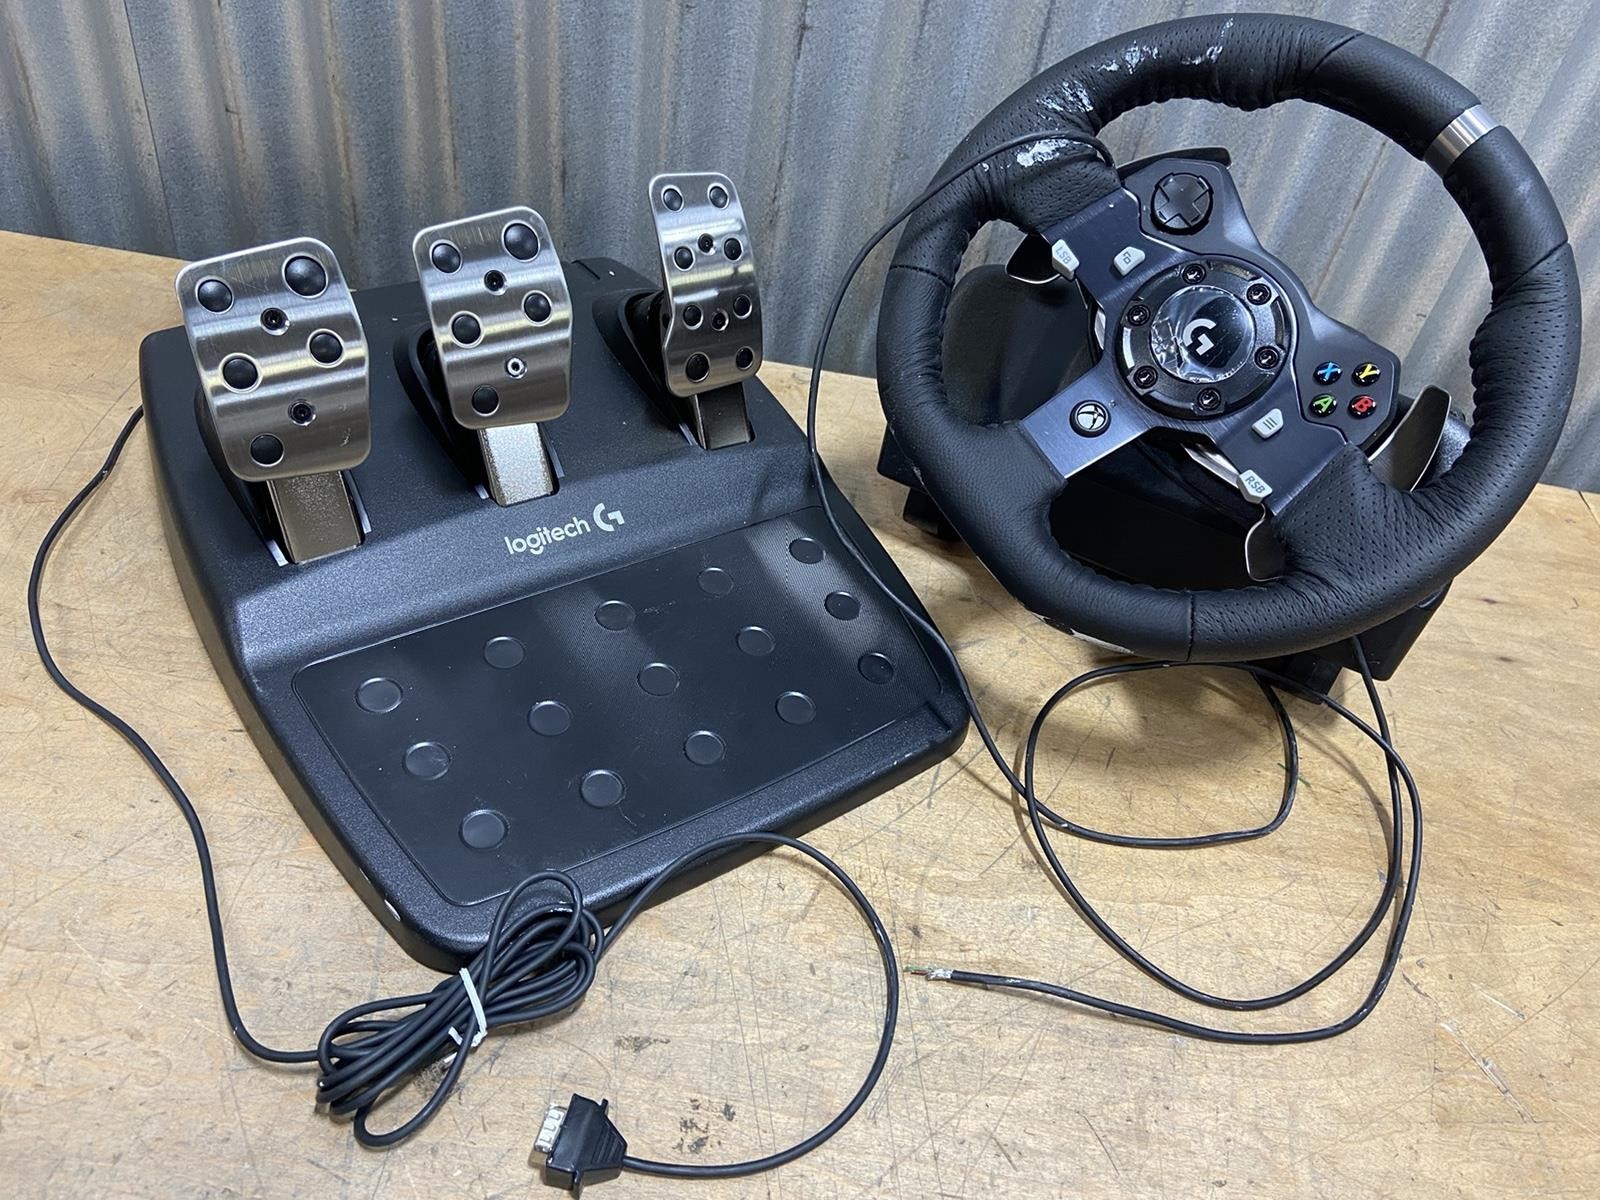 Logitech Racing Wheel And Pedals For Console